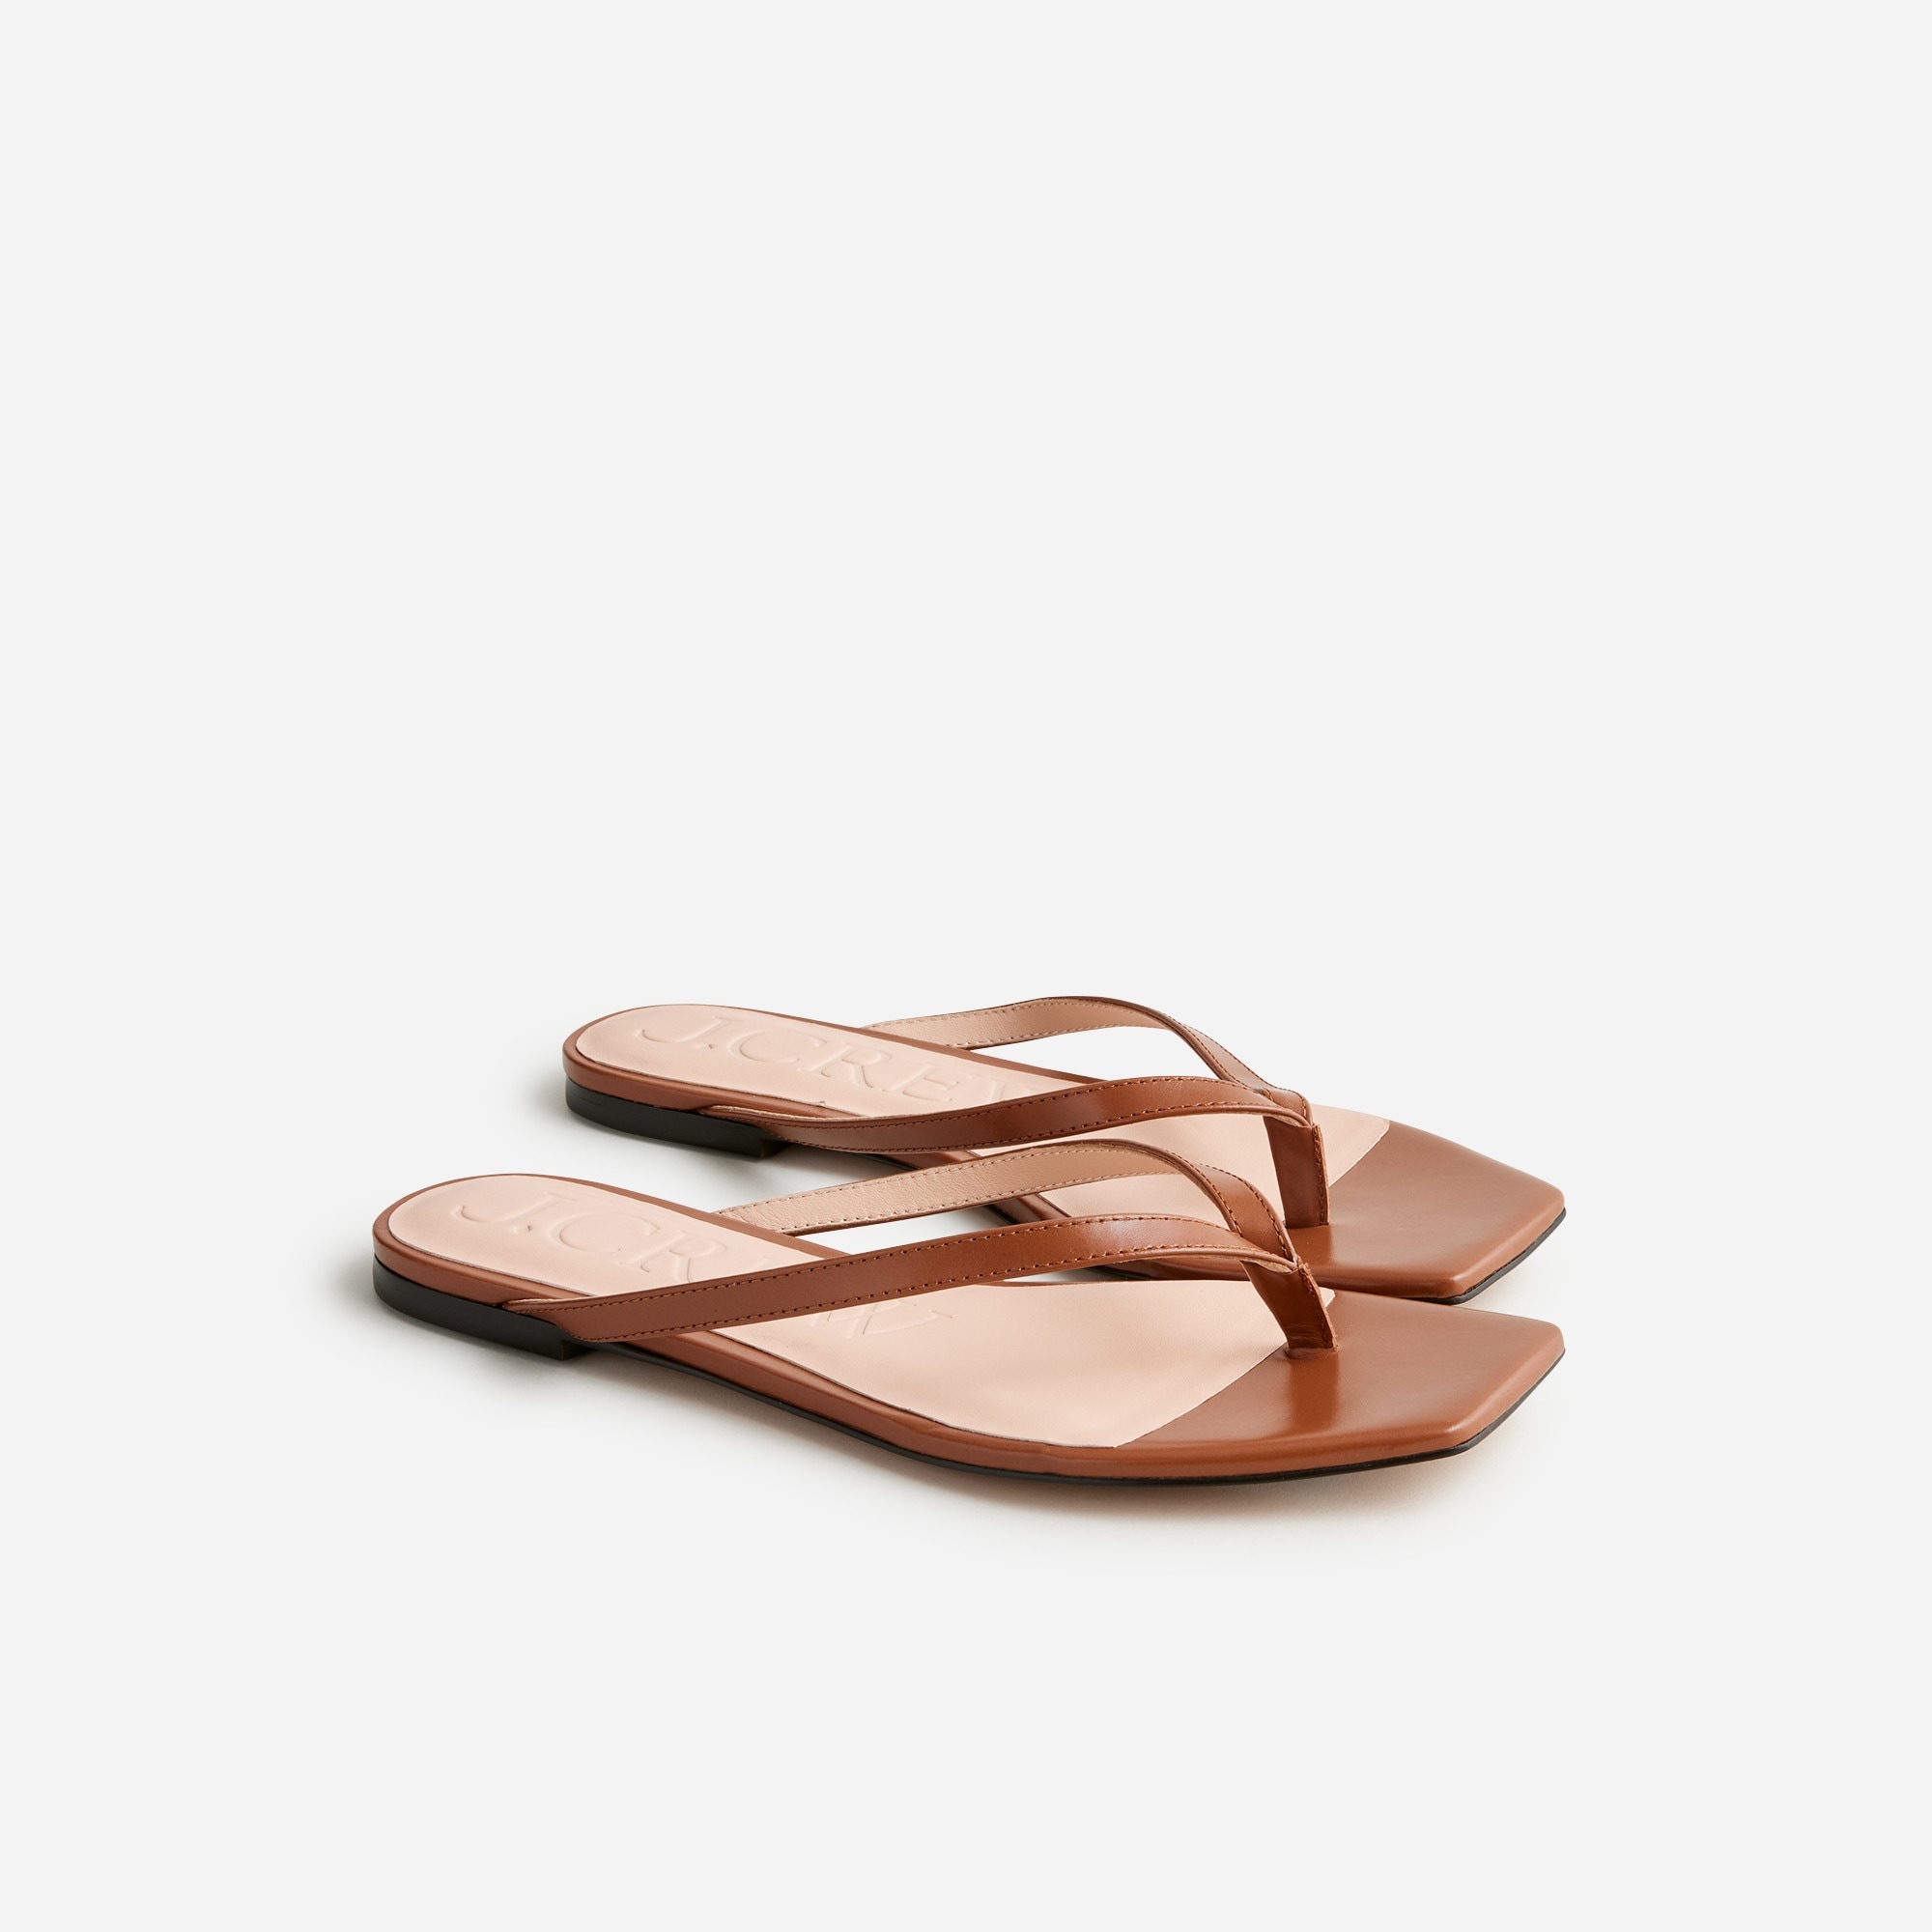 womens Capri thong sandals in leather